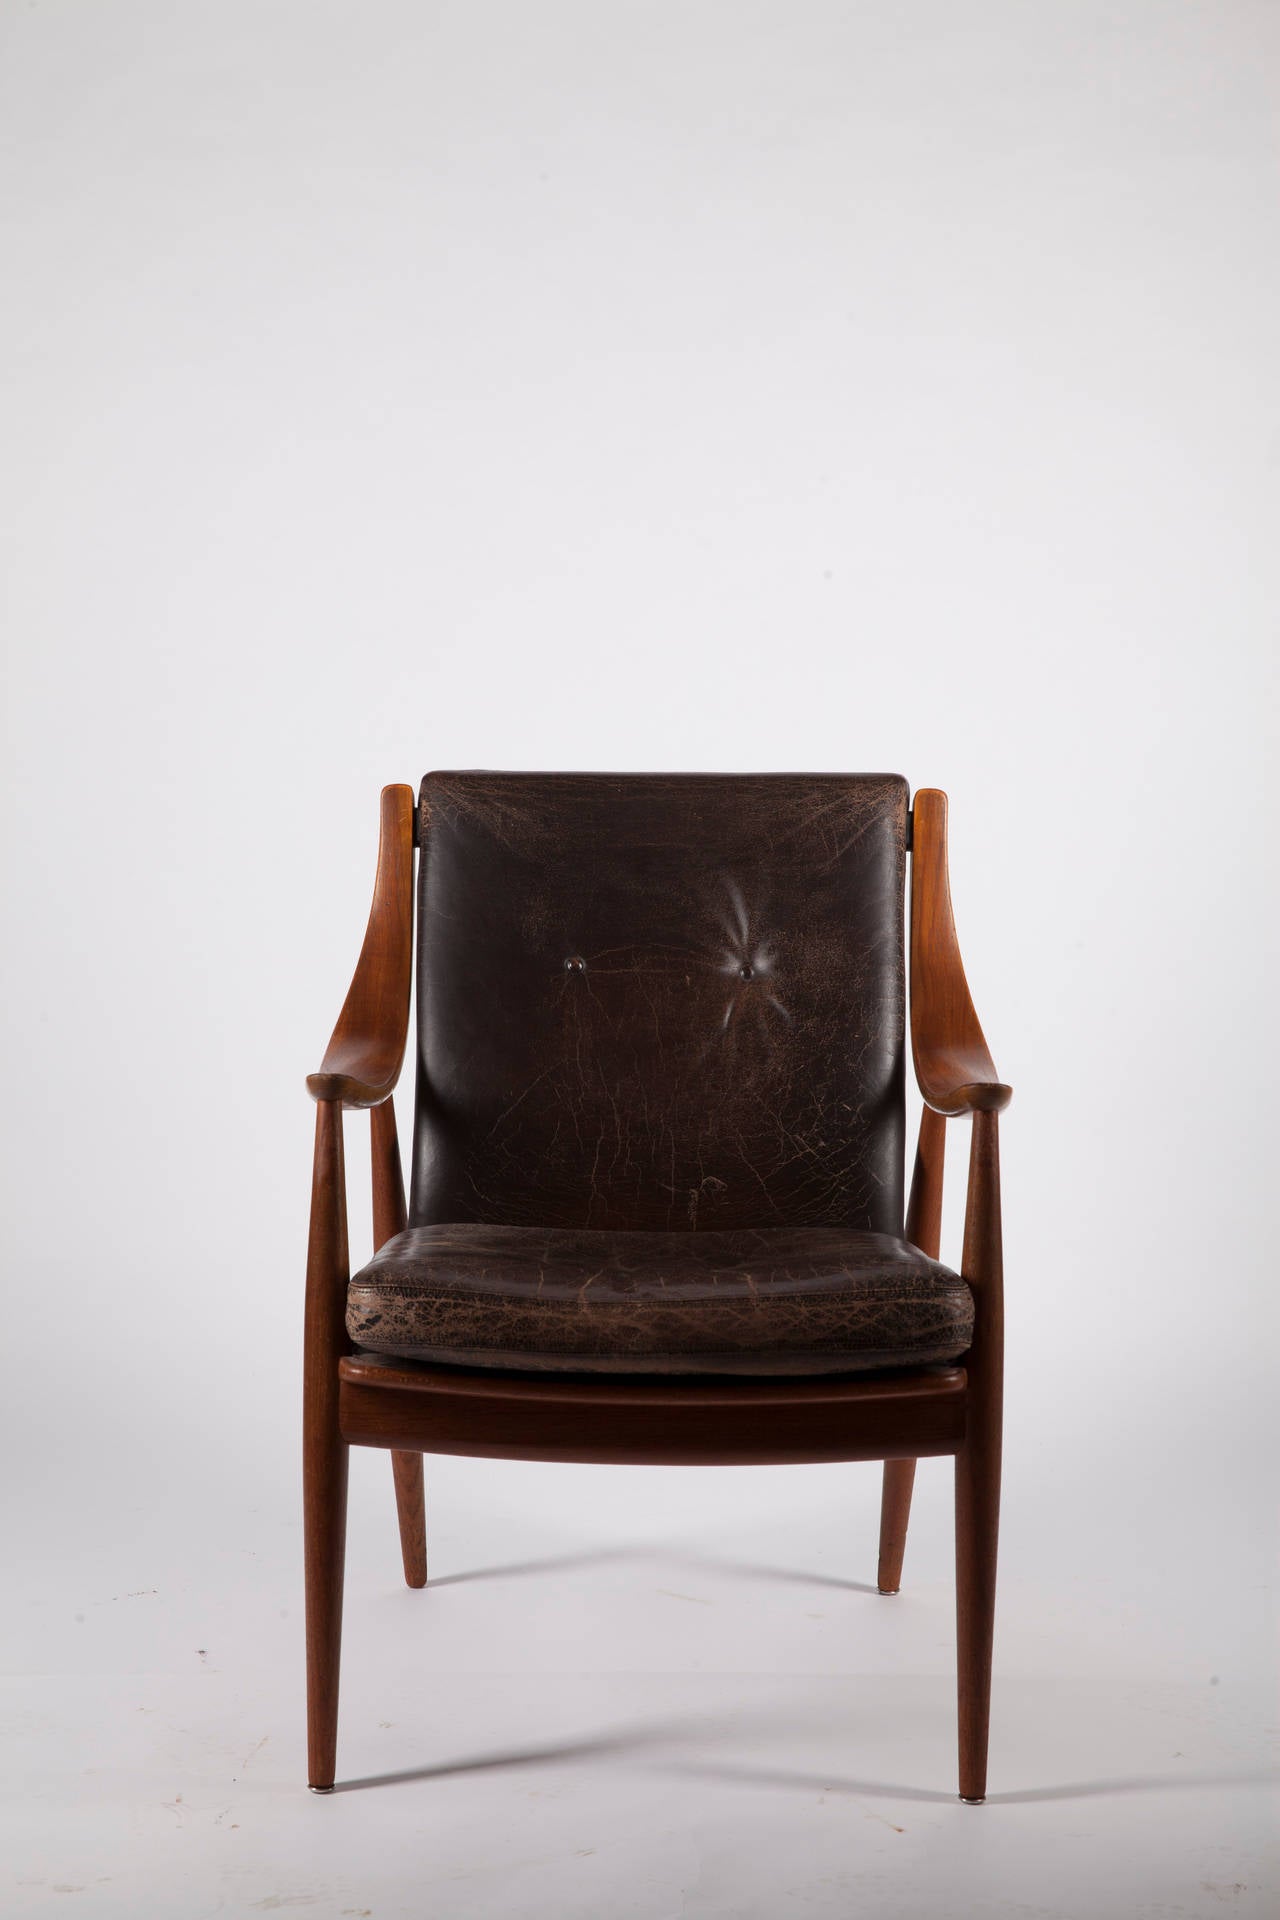 A characteristic easy chair with original leather upholstery and bend armrests from 1953. 
The chair, known as model 148, was designed by Peter Hvidt (1916-1986) and Orla Mølgaard-Nielsen (1907-1993) and produced by the Danish company France &